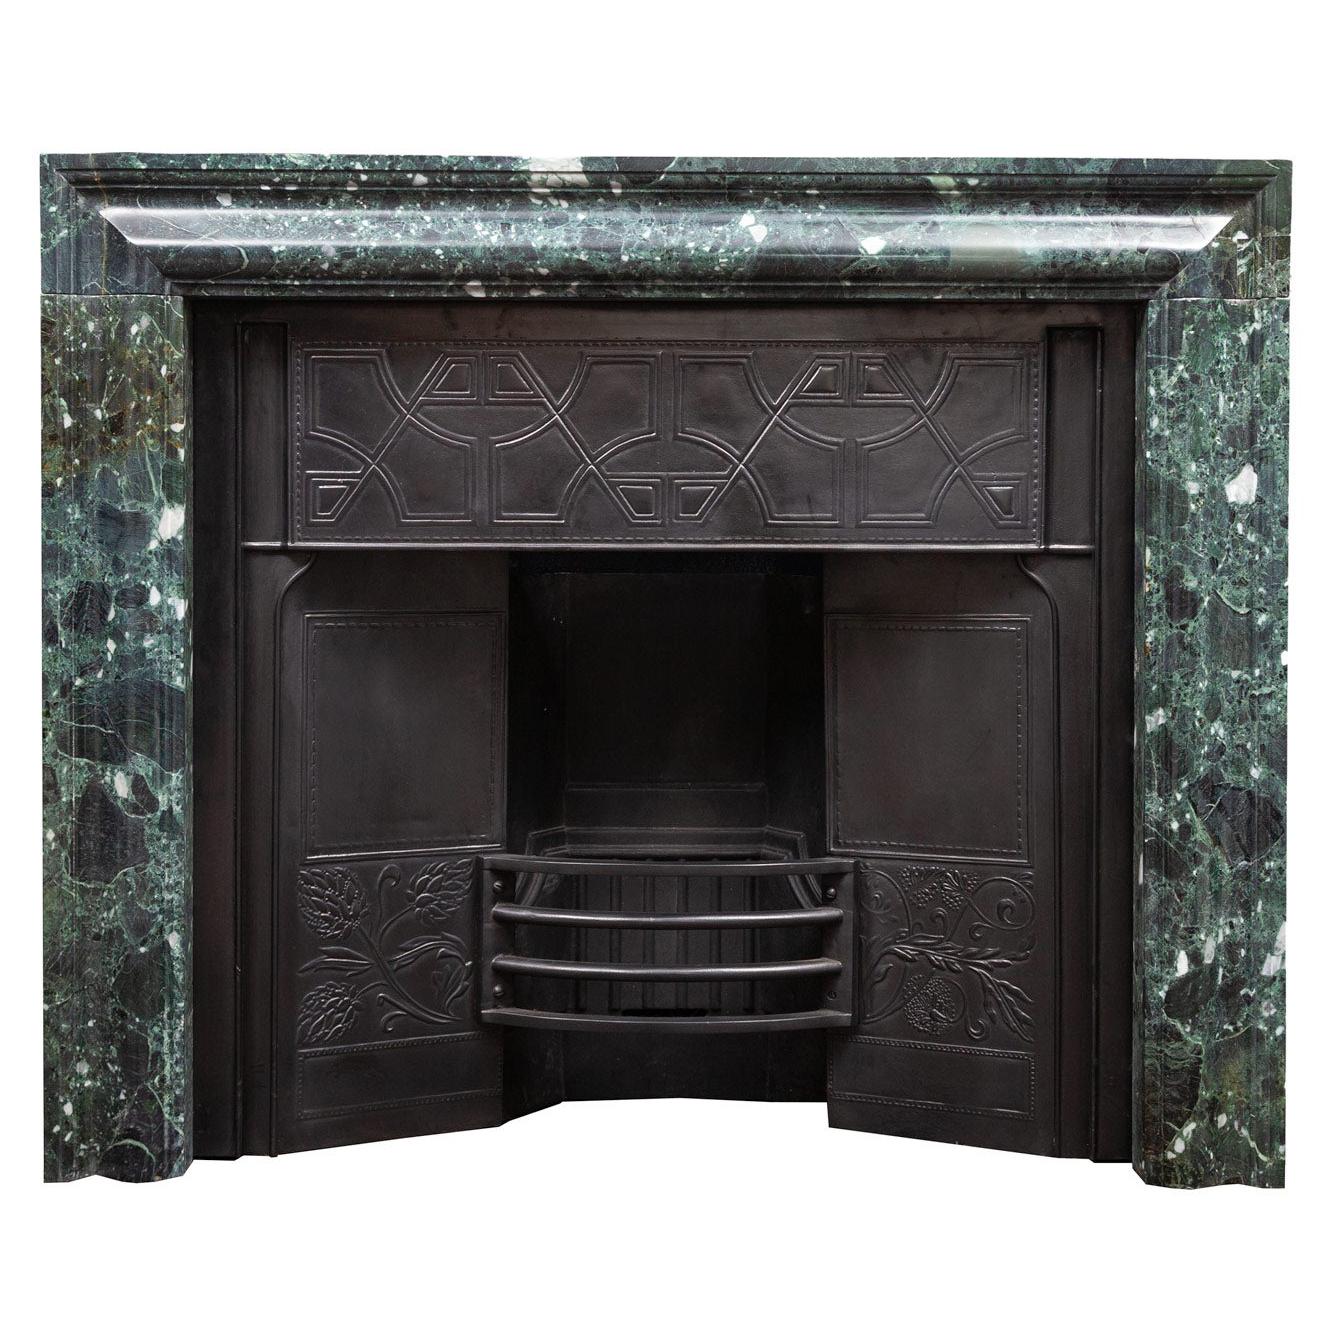 Antique Marble Bolection Fireplace with Metal Insert in the Mackintosh Style